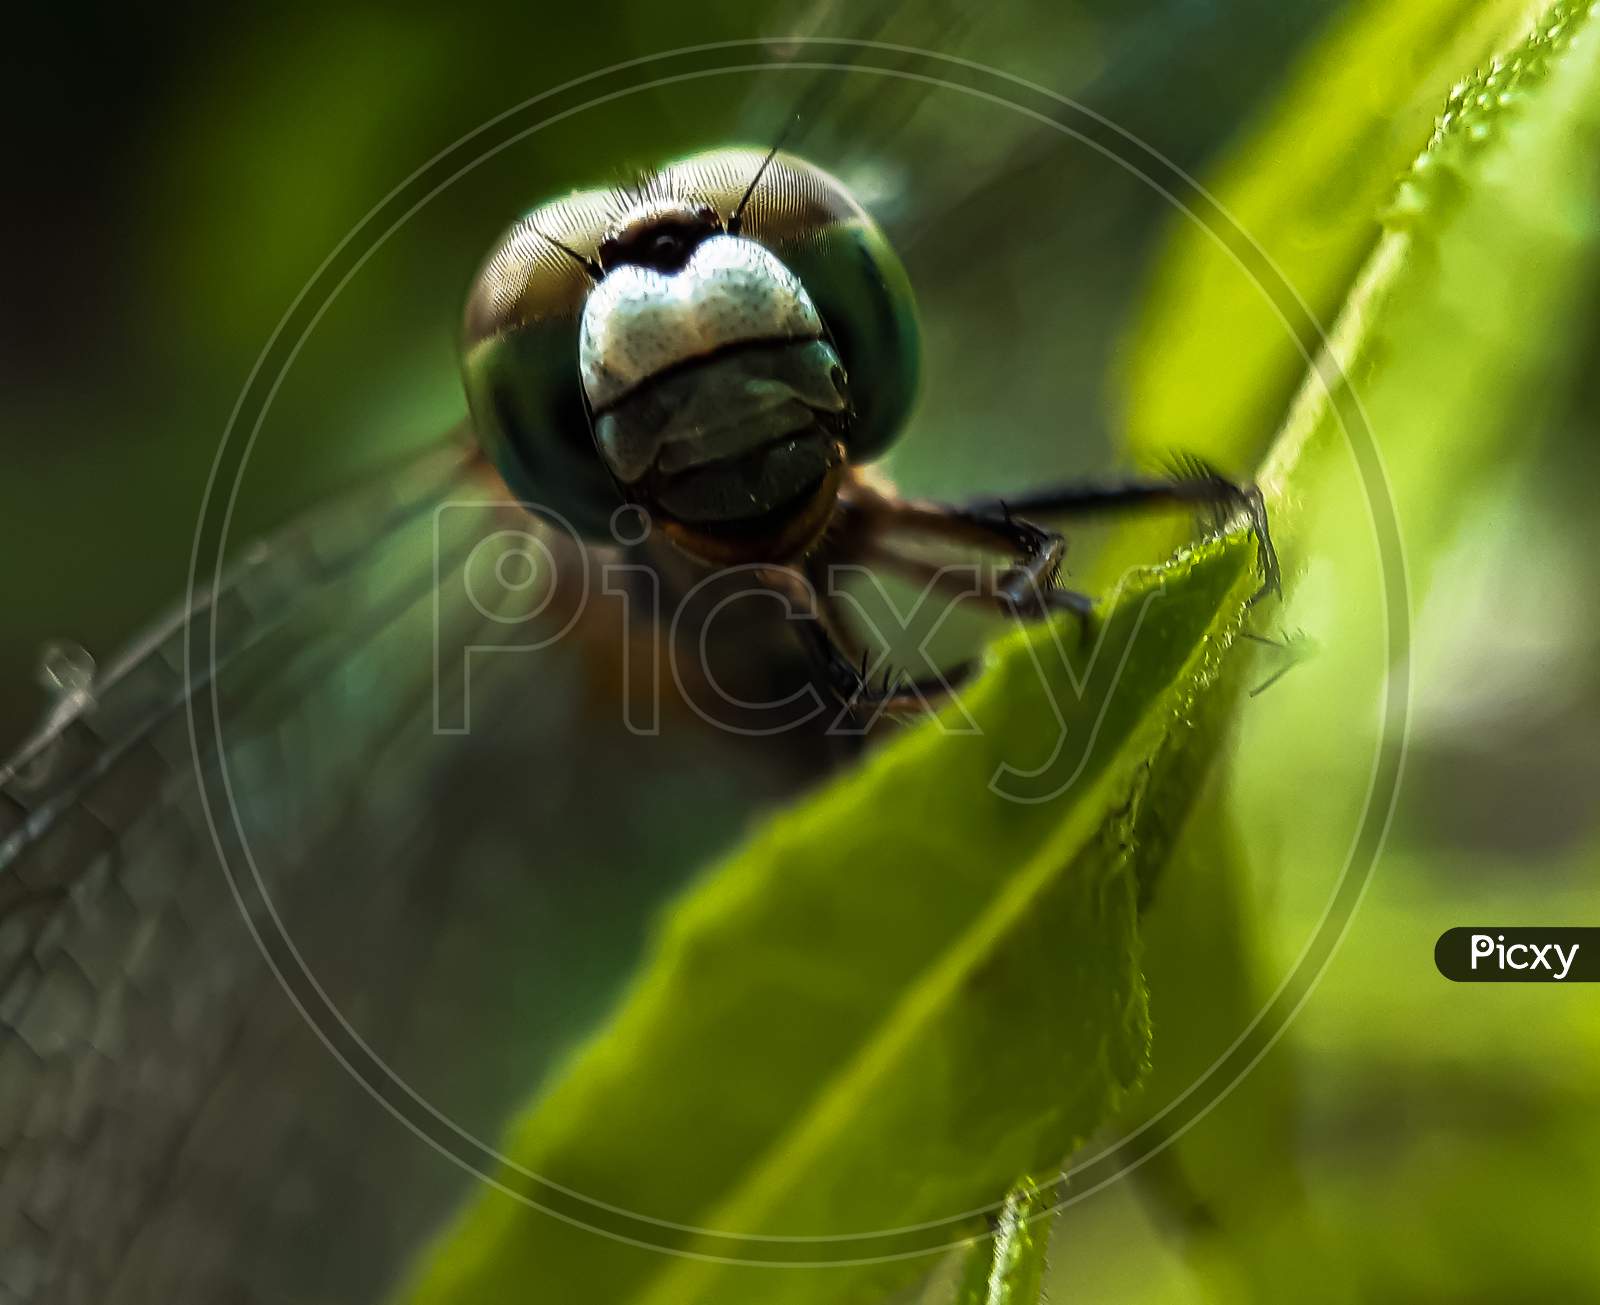 Dragon Fly Siting On The Green Leaves And Green Background In The Garden.